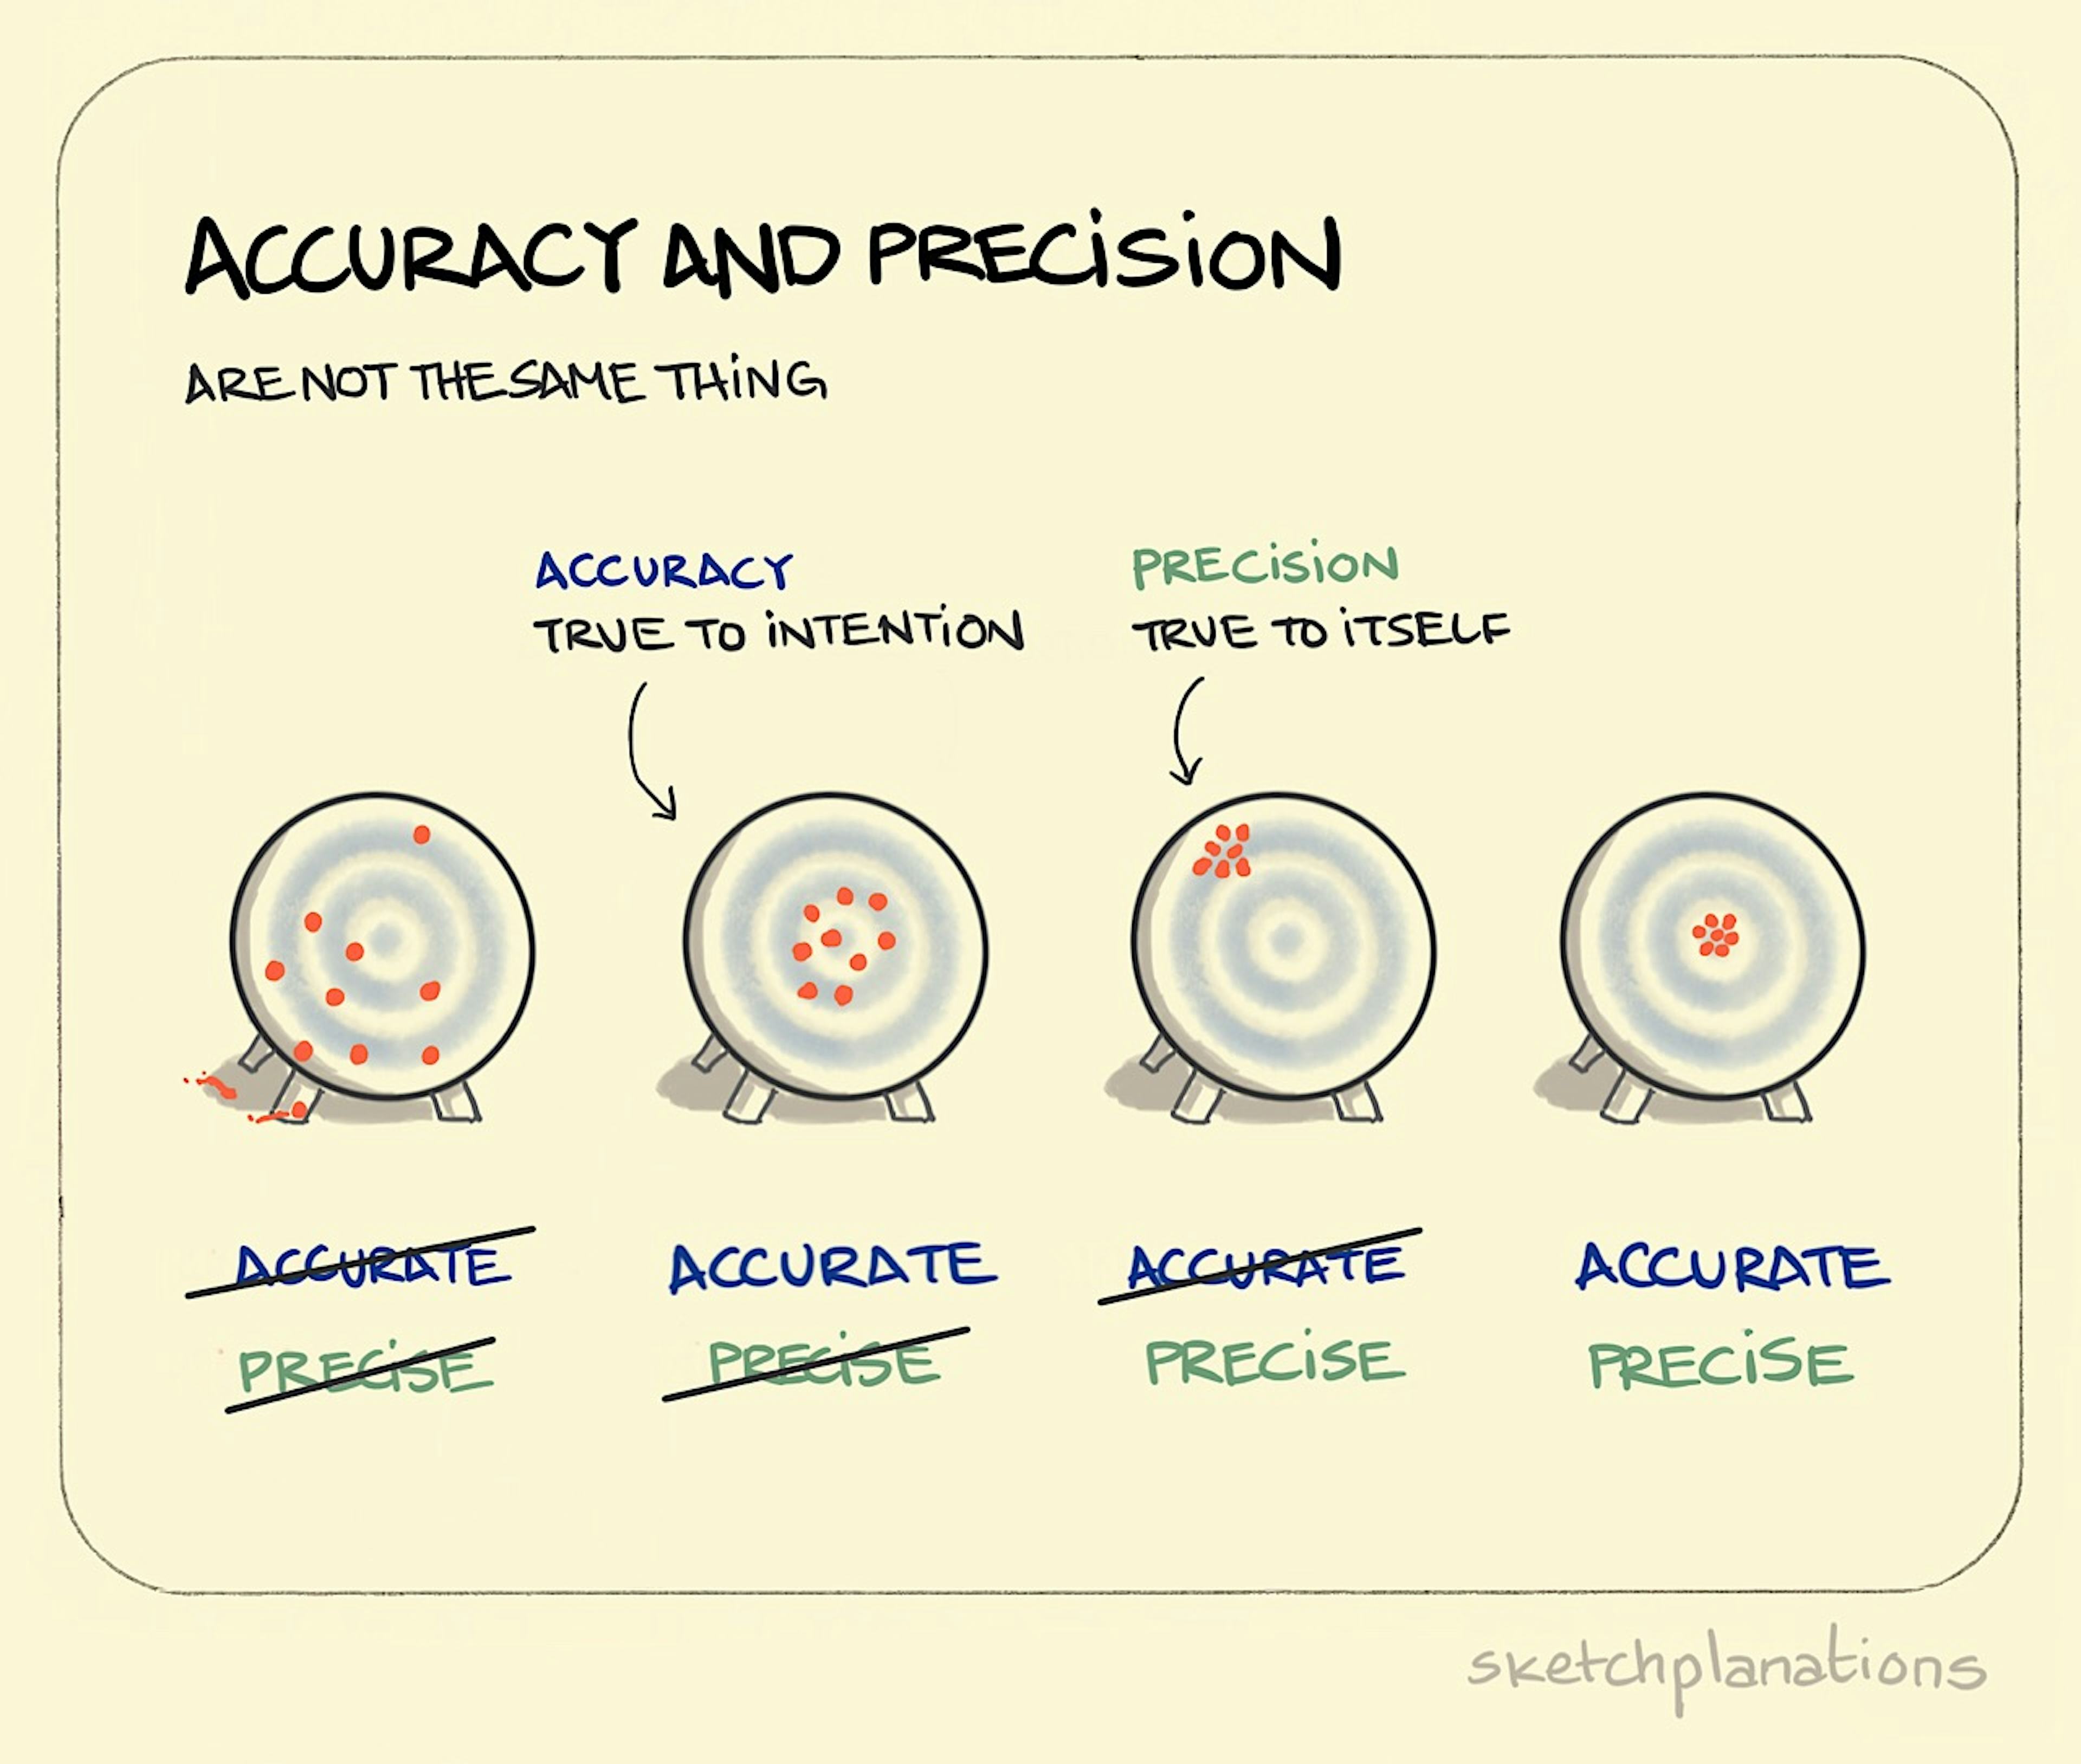 Accuracy and Precision illustration: 4 circular targets with red dots marking a series of strikes show the difference between accuracy and precision. 